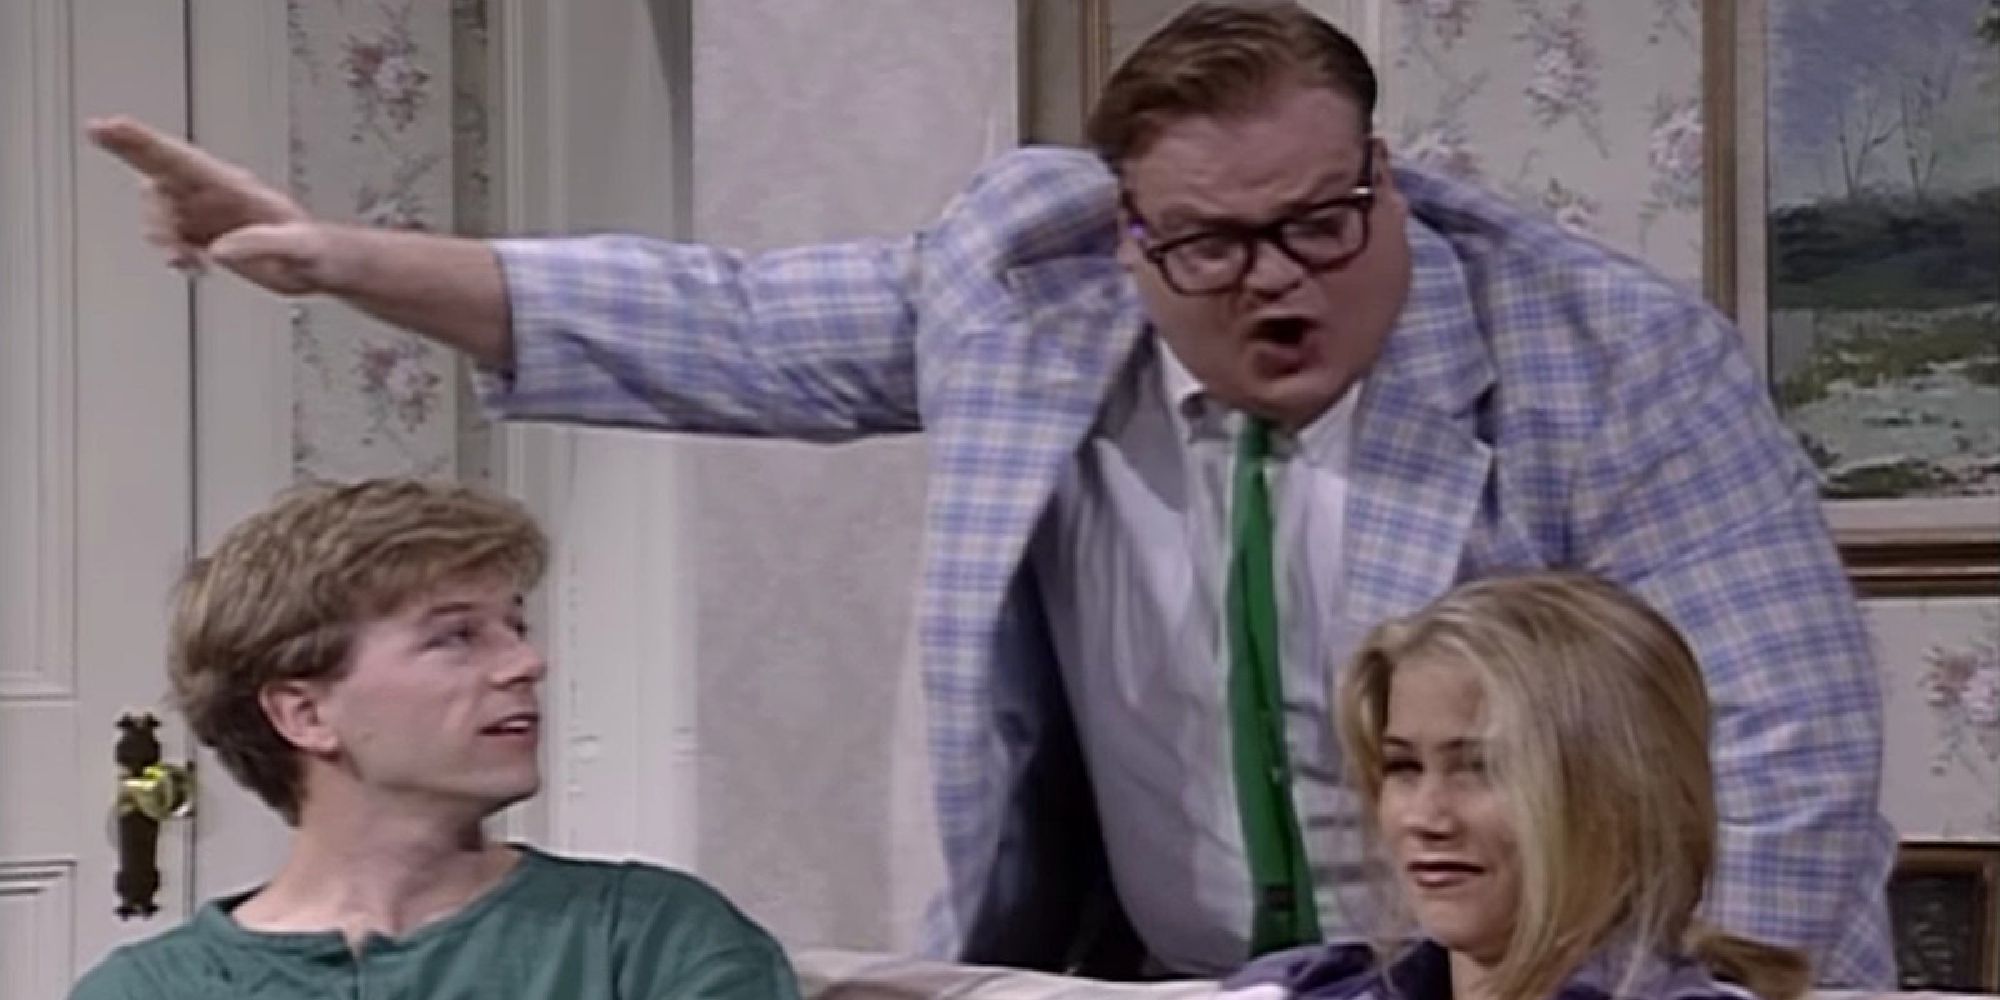 Matt Foley yelling at two teenagers played by David Spade and Christina Applegate